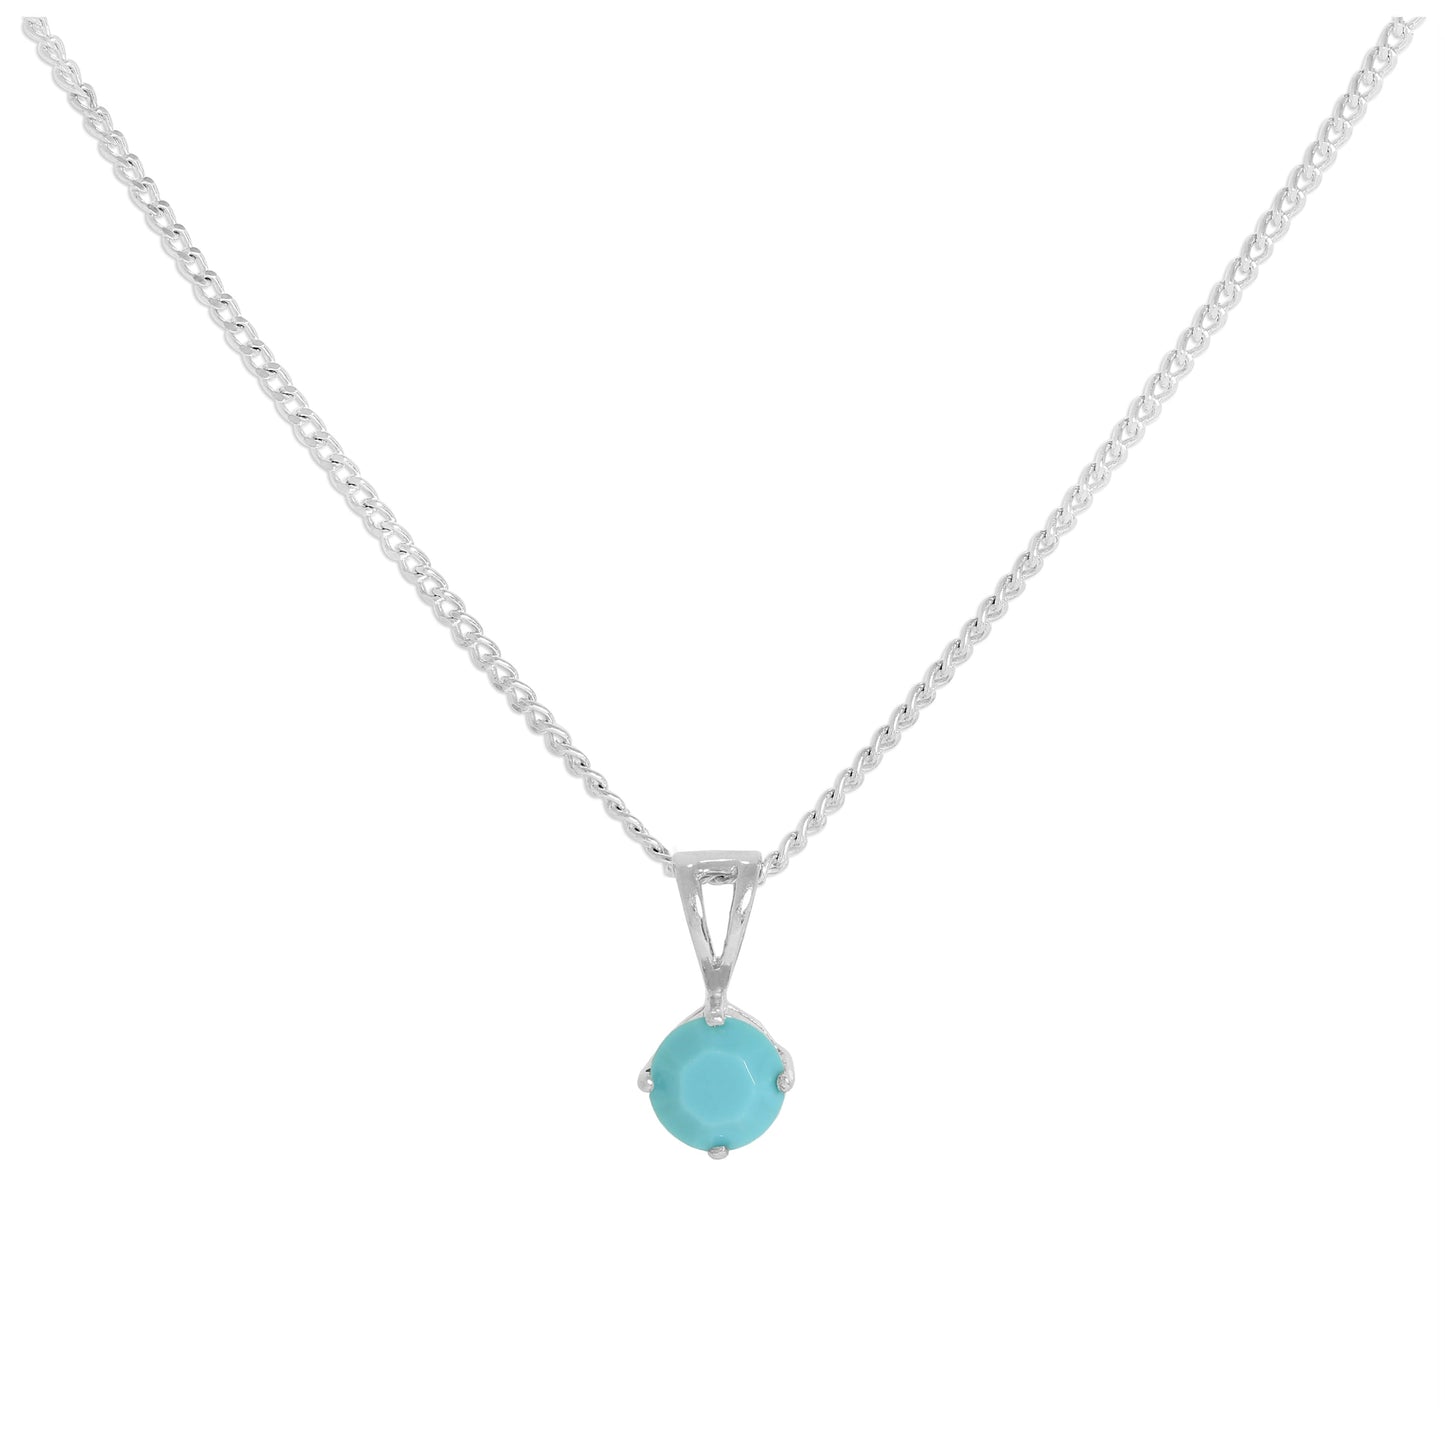 Sterling Silver & Turquoise CZ December Birthstone Pendant Necklace 16 - 24 Inches